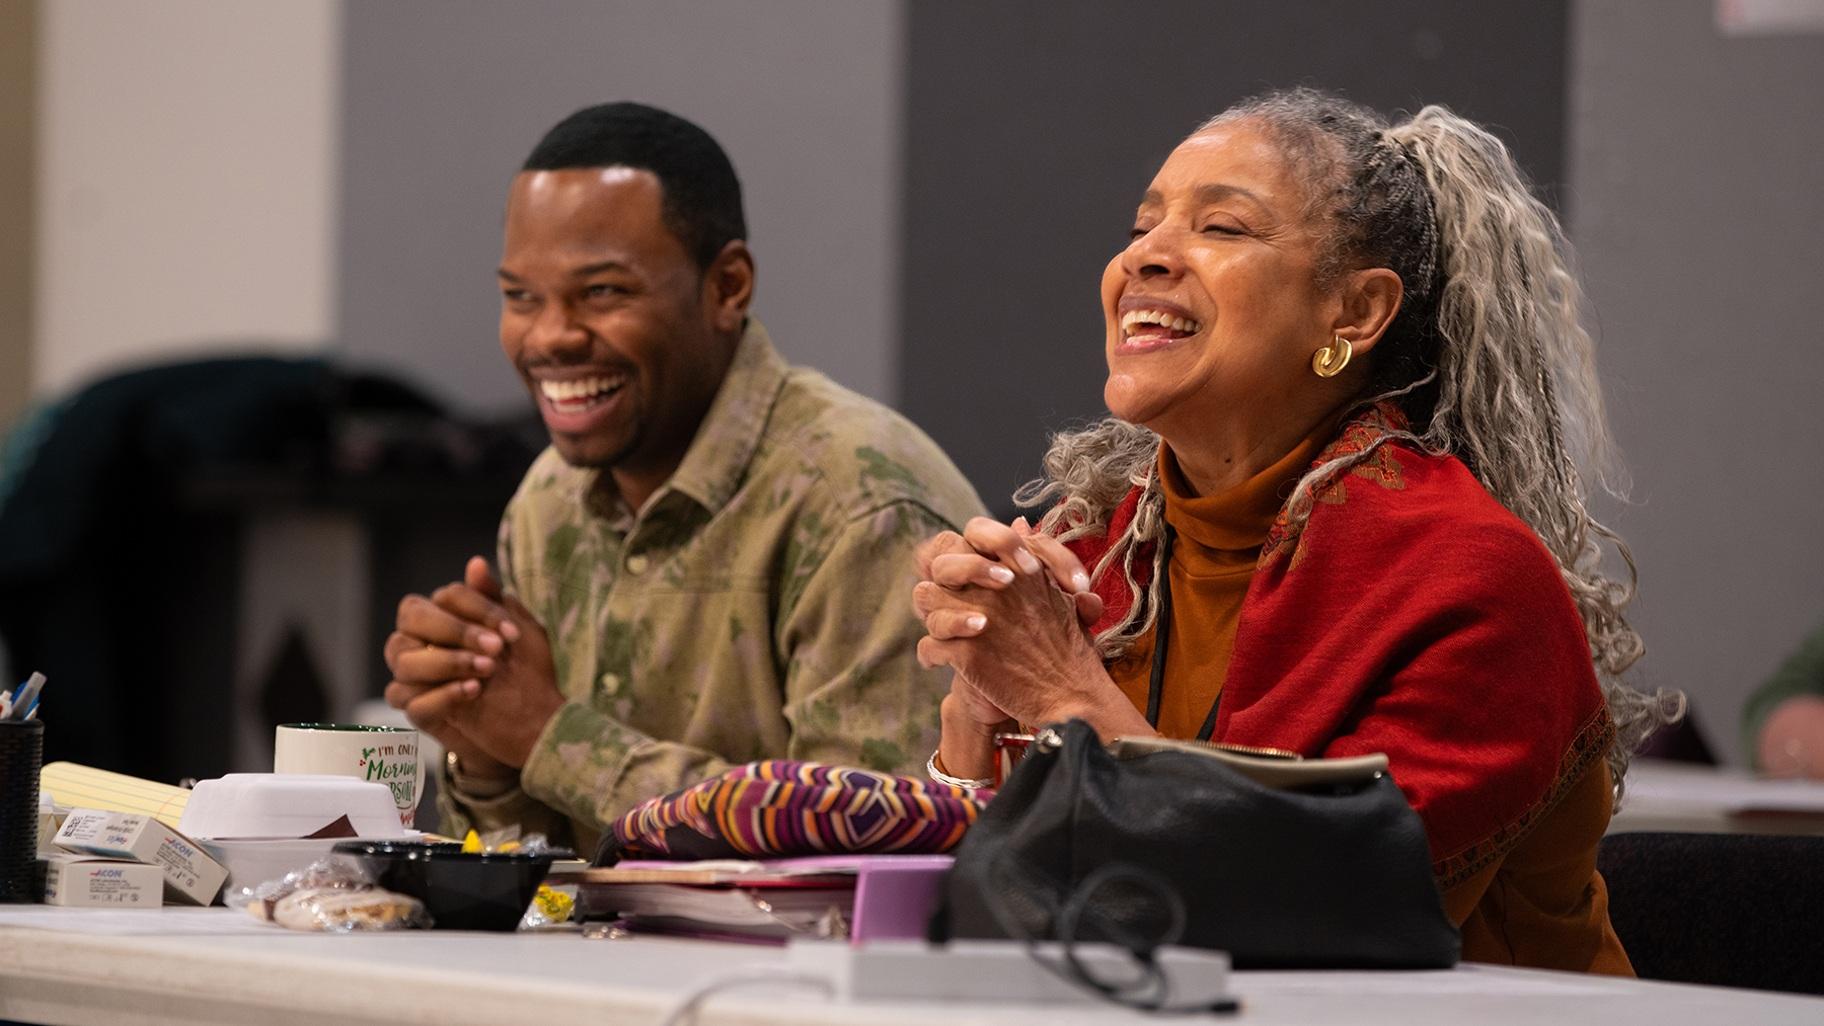 (left to right) Associate director Tyrone Phillips and director Phylicia Rashad in rehearsal for Steppenwolf Theatre’s world premiere of “Purpose.” (Joel Moorman)